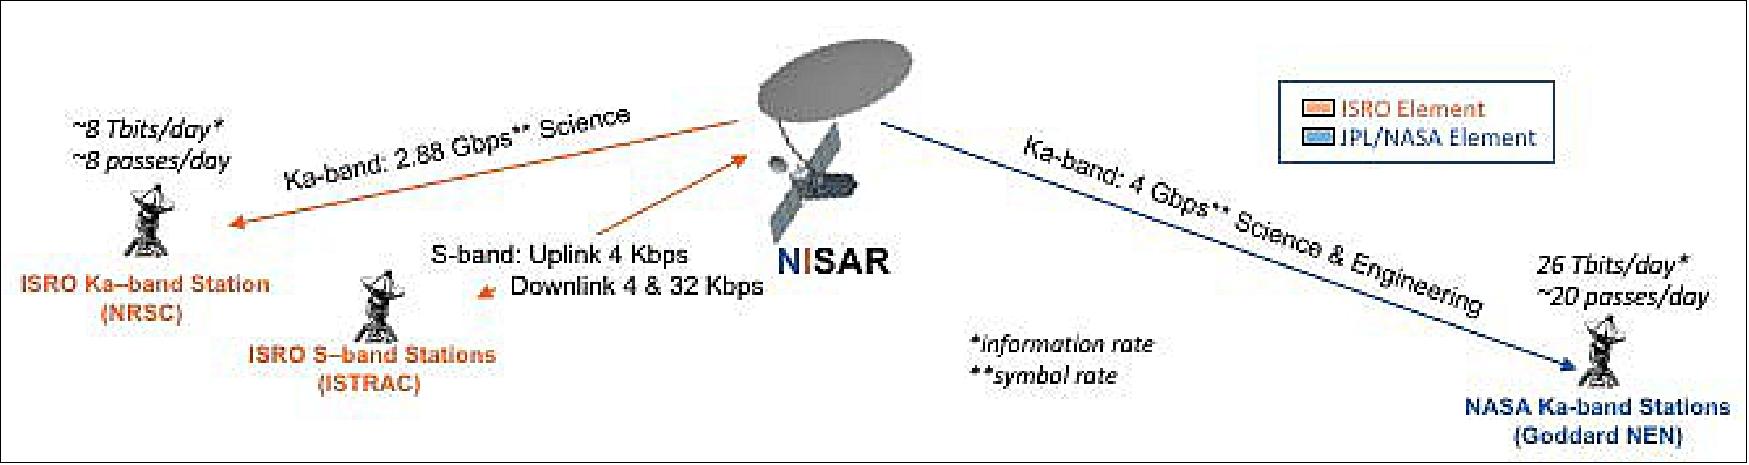 Figure 14: NISAR telecommunications links include Ka-band downlink to NASA and ISRO stations at 4 Gbit/s and 2.88 Gbit/s, respectively, and S-band uplink and downlink from and to ISRO ground stations (image credit: NASA, ISRO)